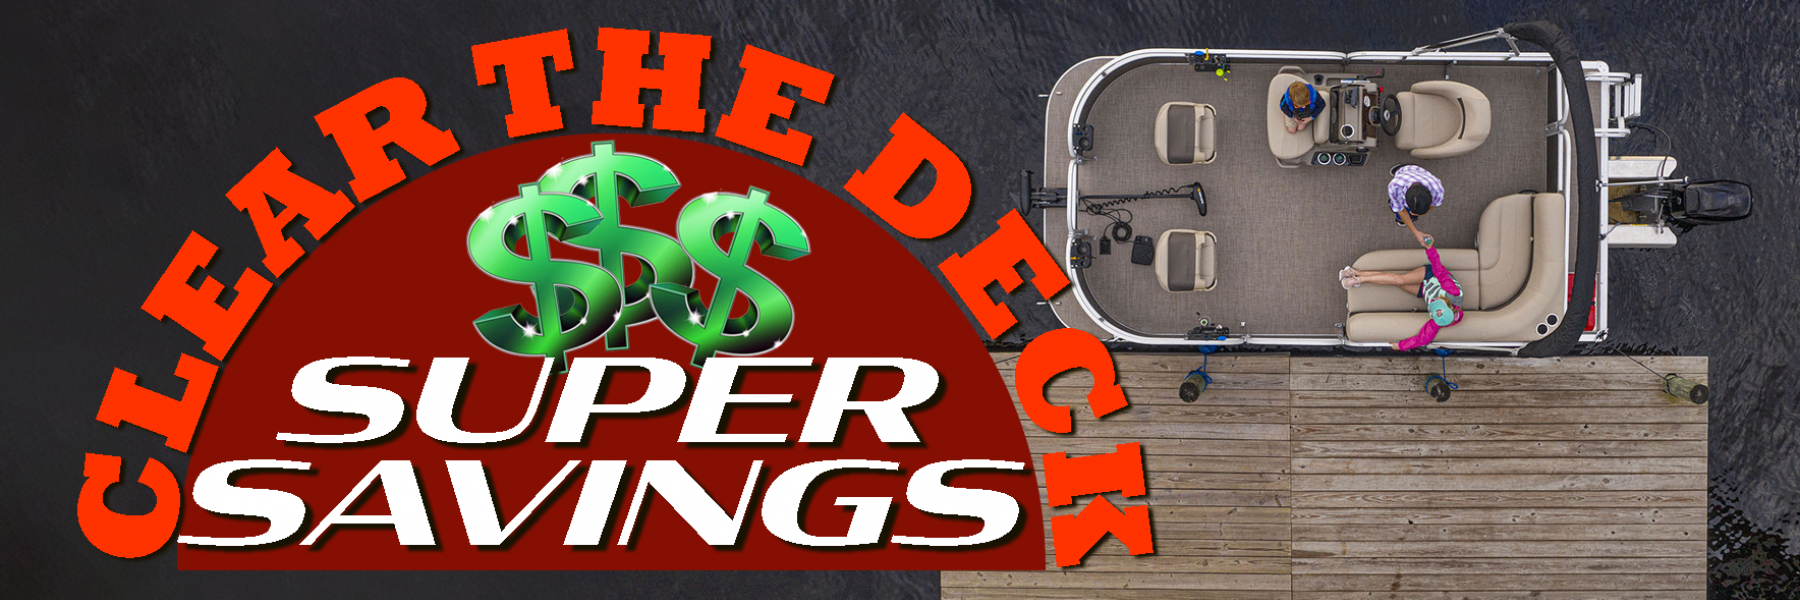 October - Clear the Deck Super Savings